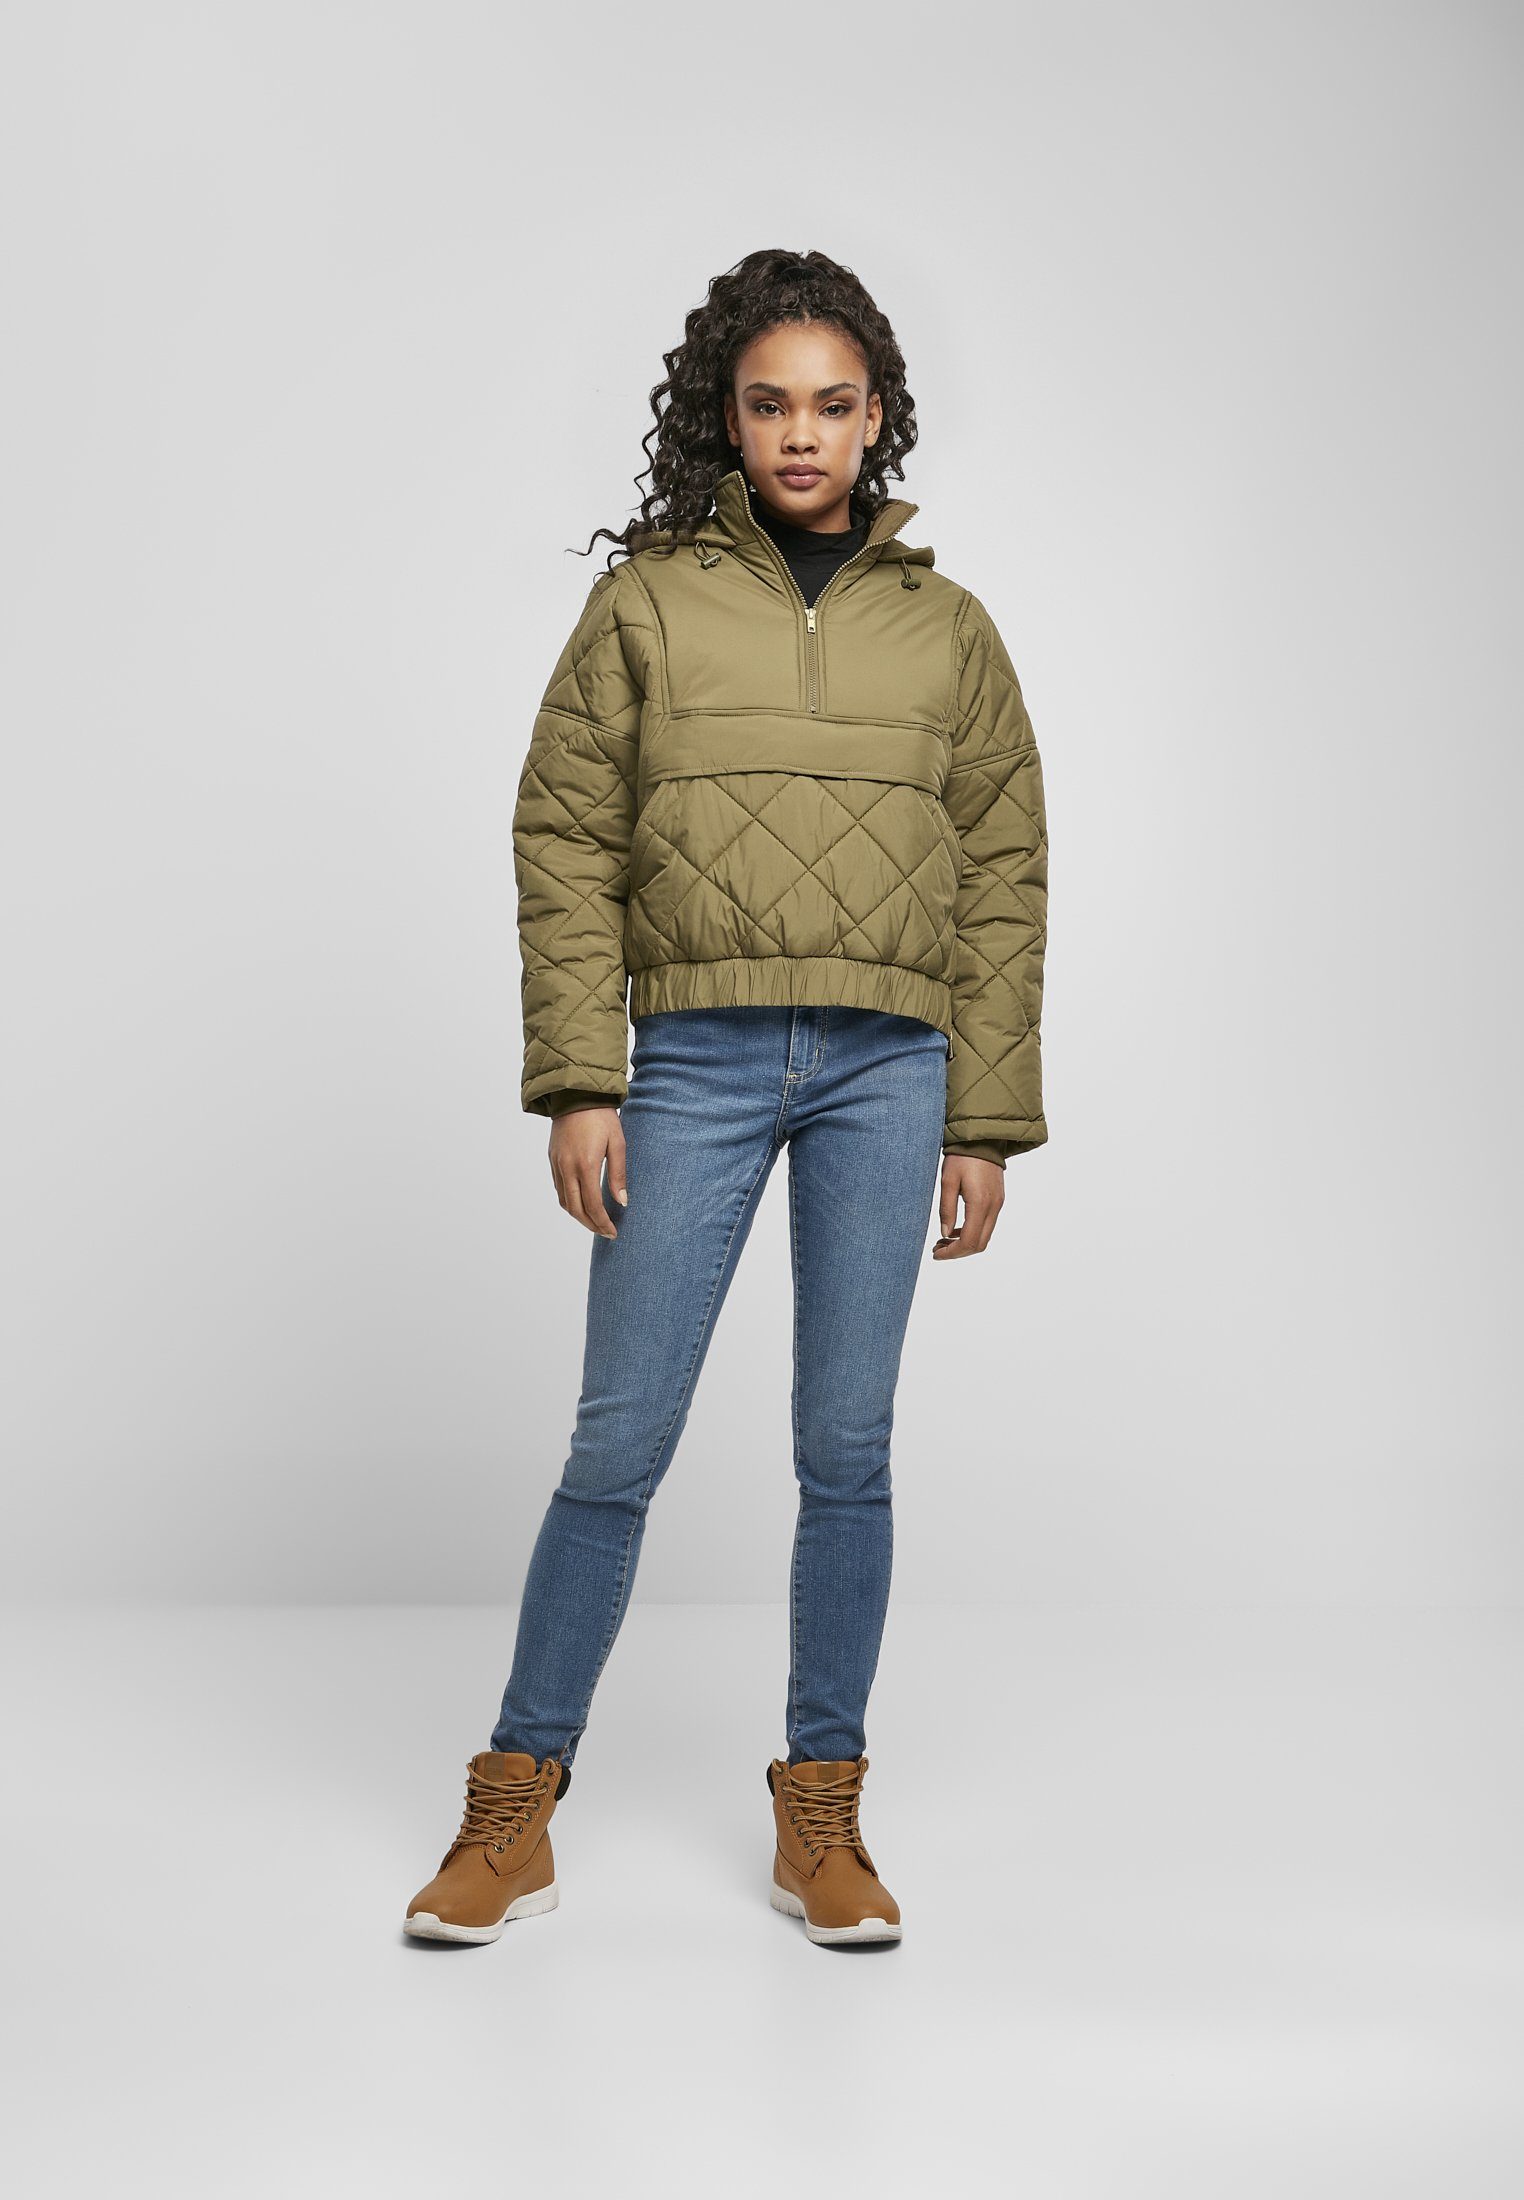 Ladies Oversized Jacket Quilted URBAN tiniolive Diamond Pull CLASSICS (1-St) Damen Over Winterjacke